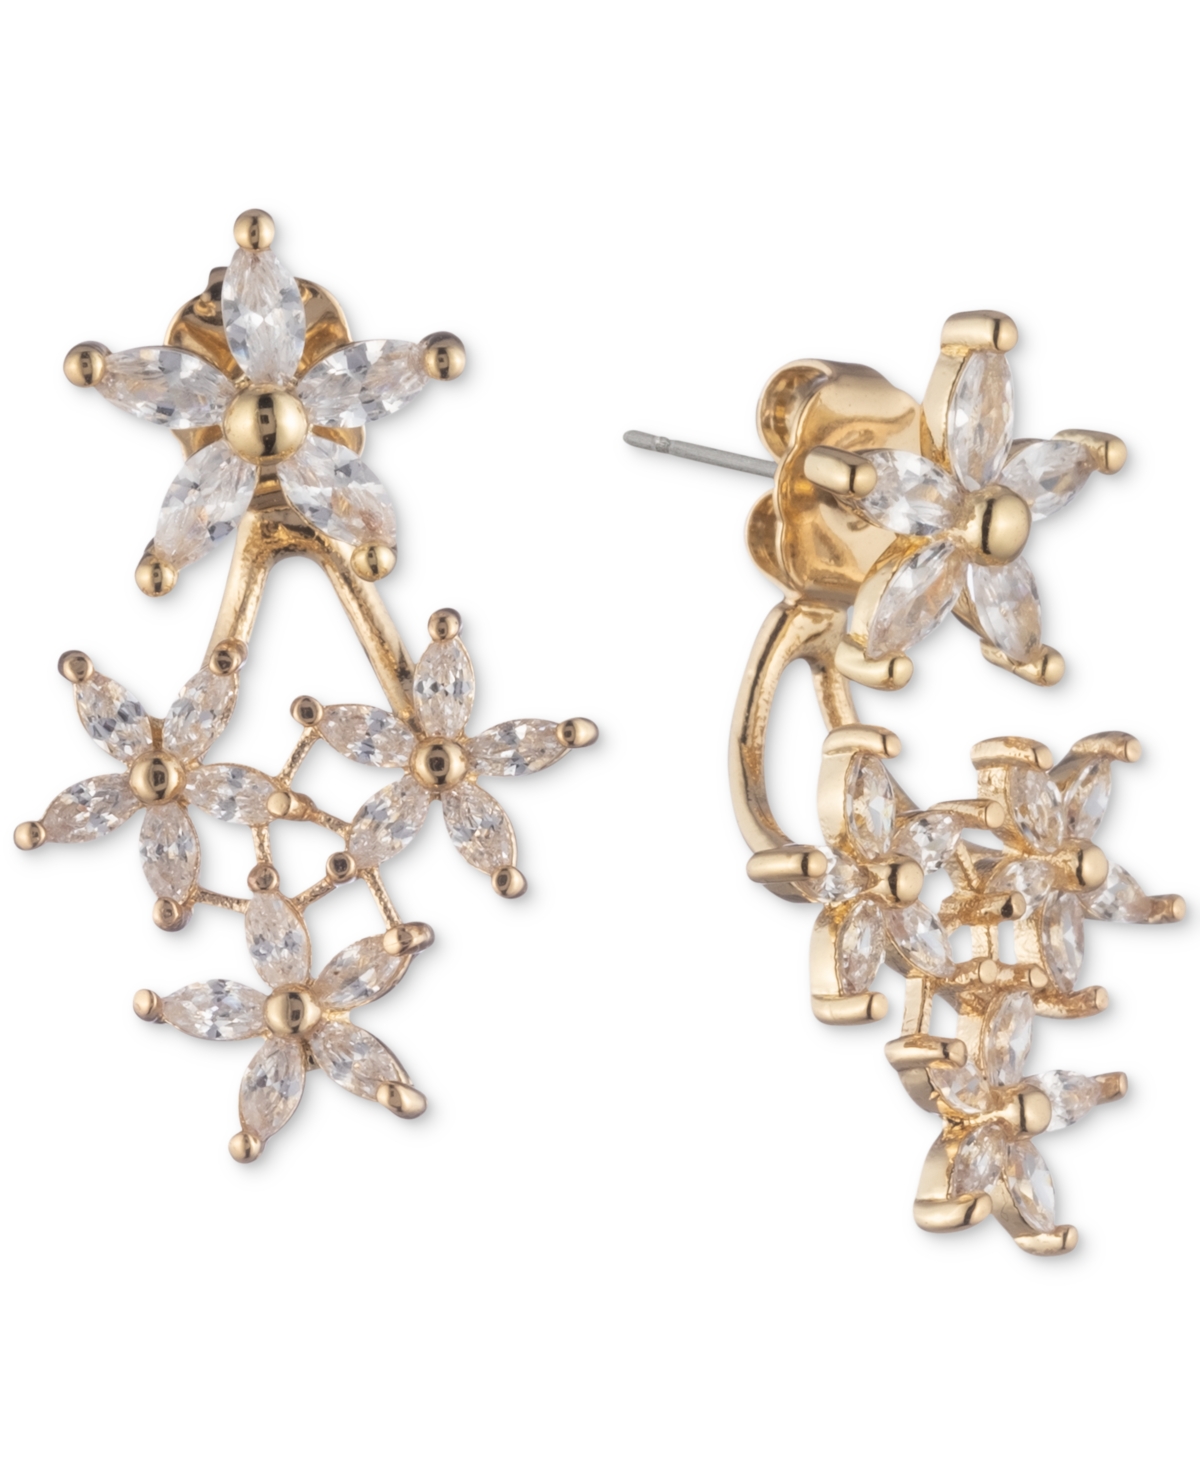 Gold-Tone Crystal Flower Front-and-Back Earrings - Crystal